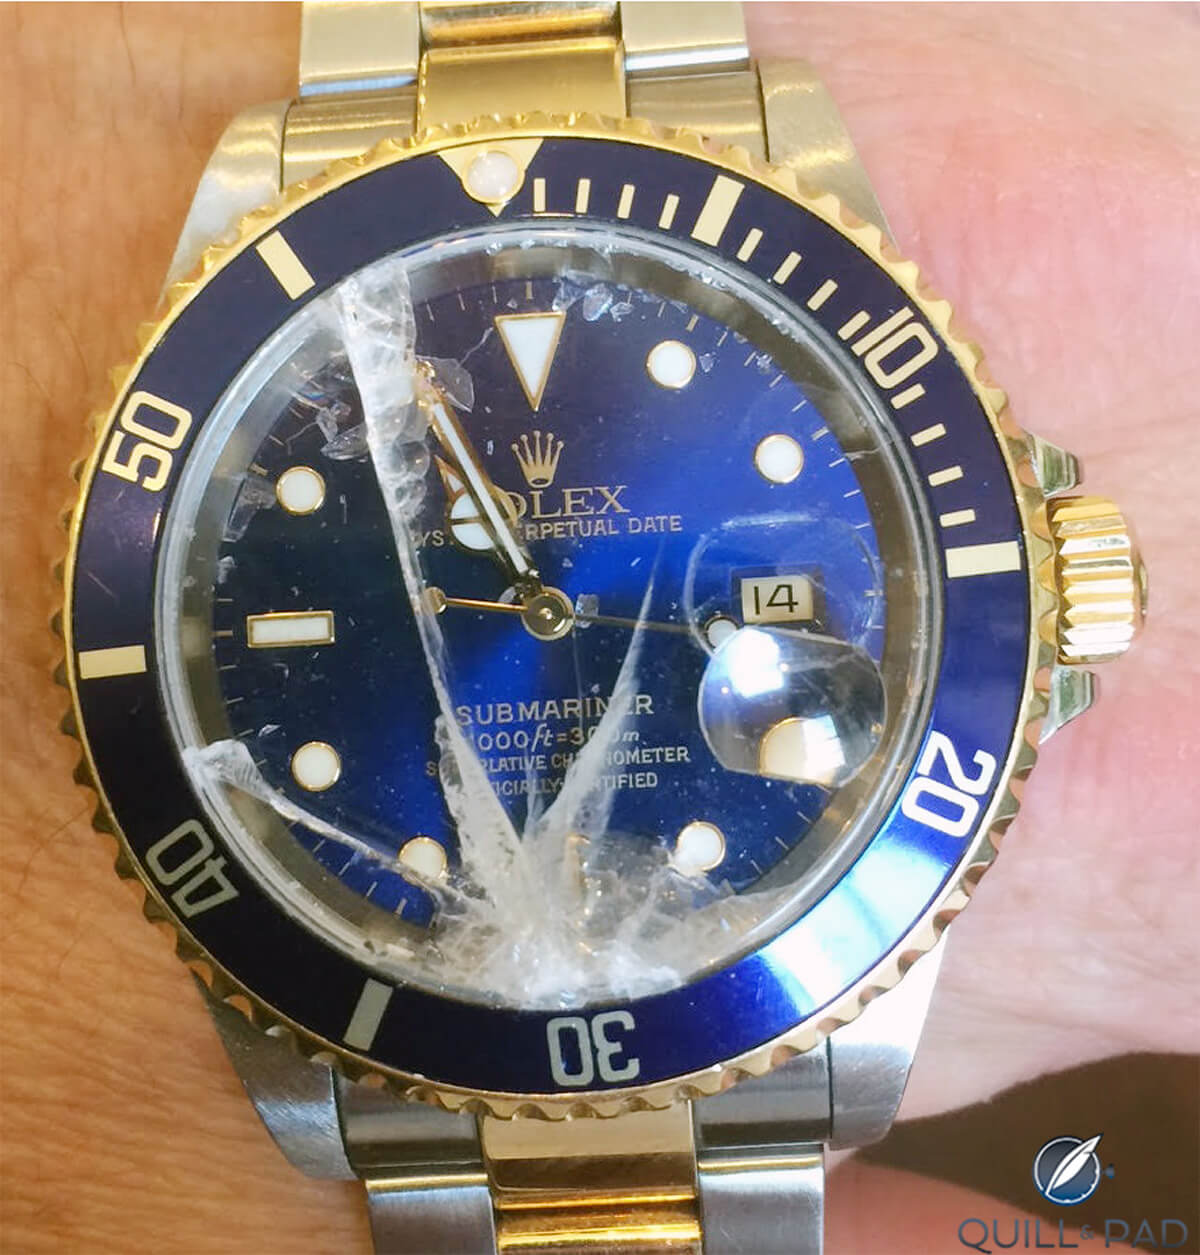 Ouchhh!!! This Rolex Submariner has seen better times